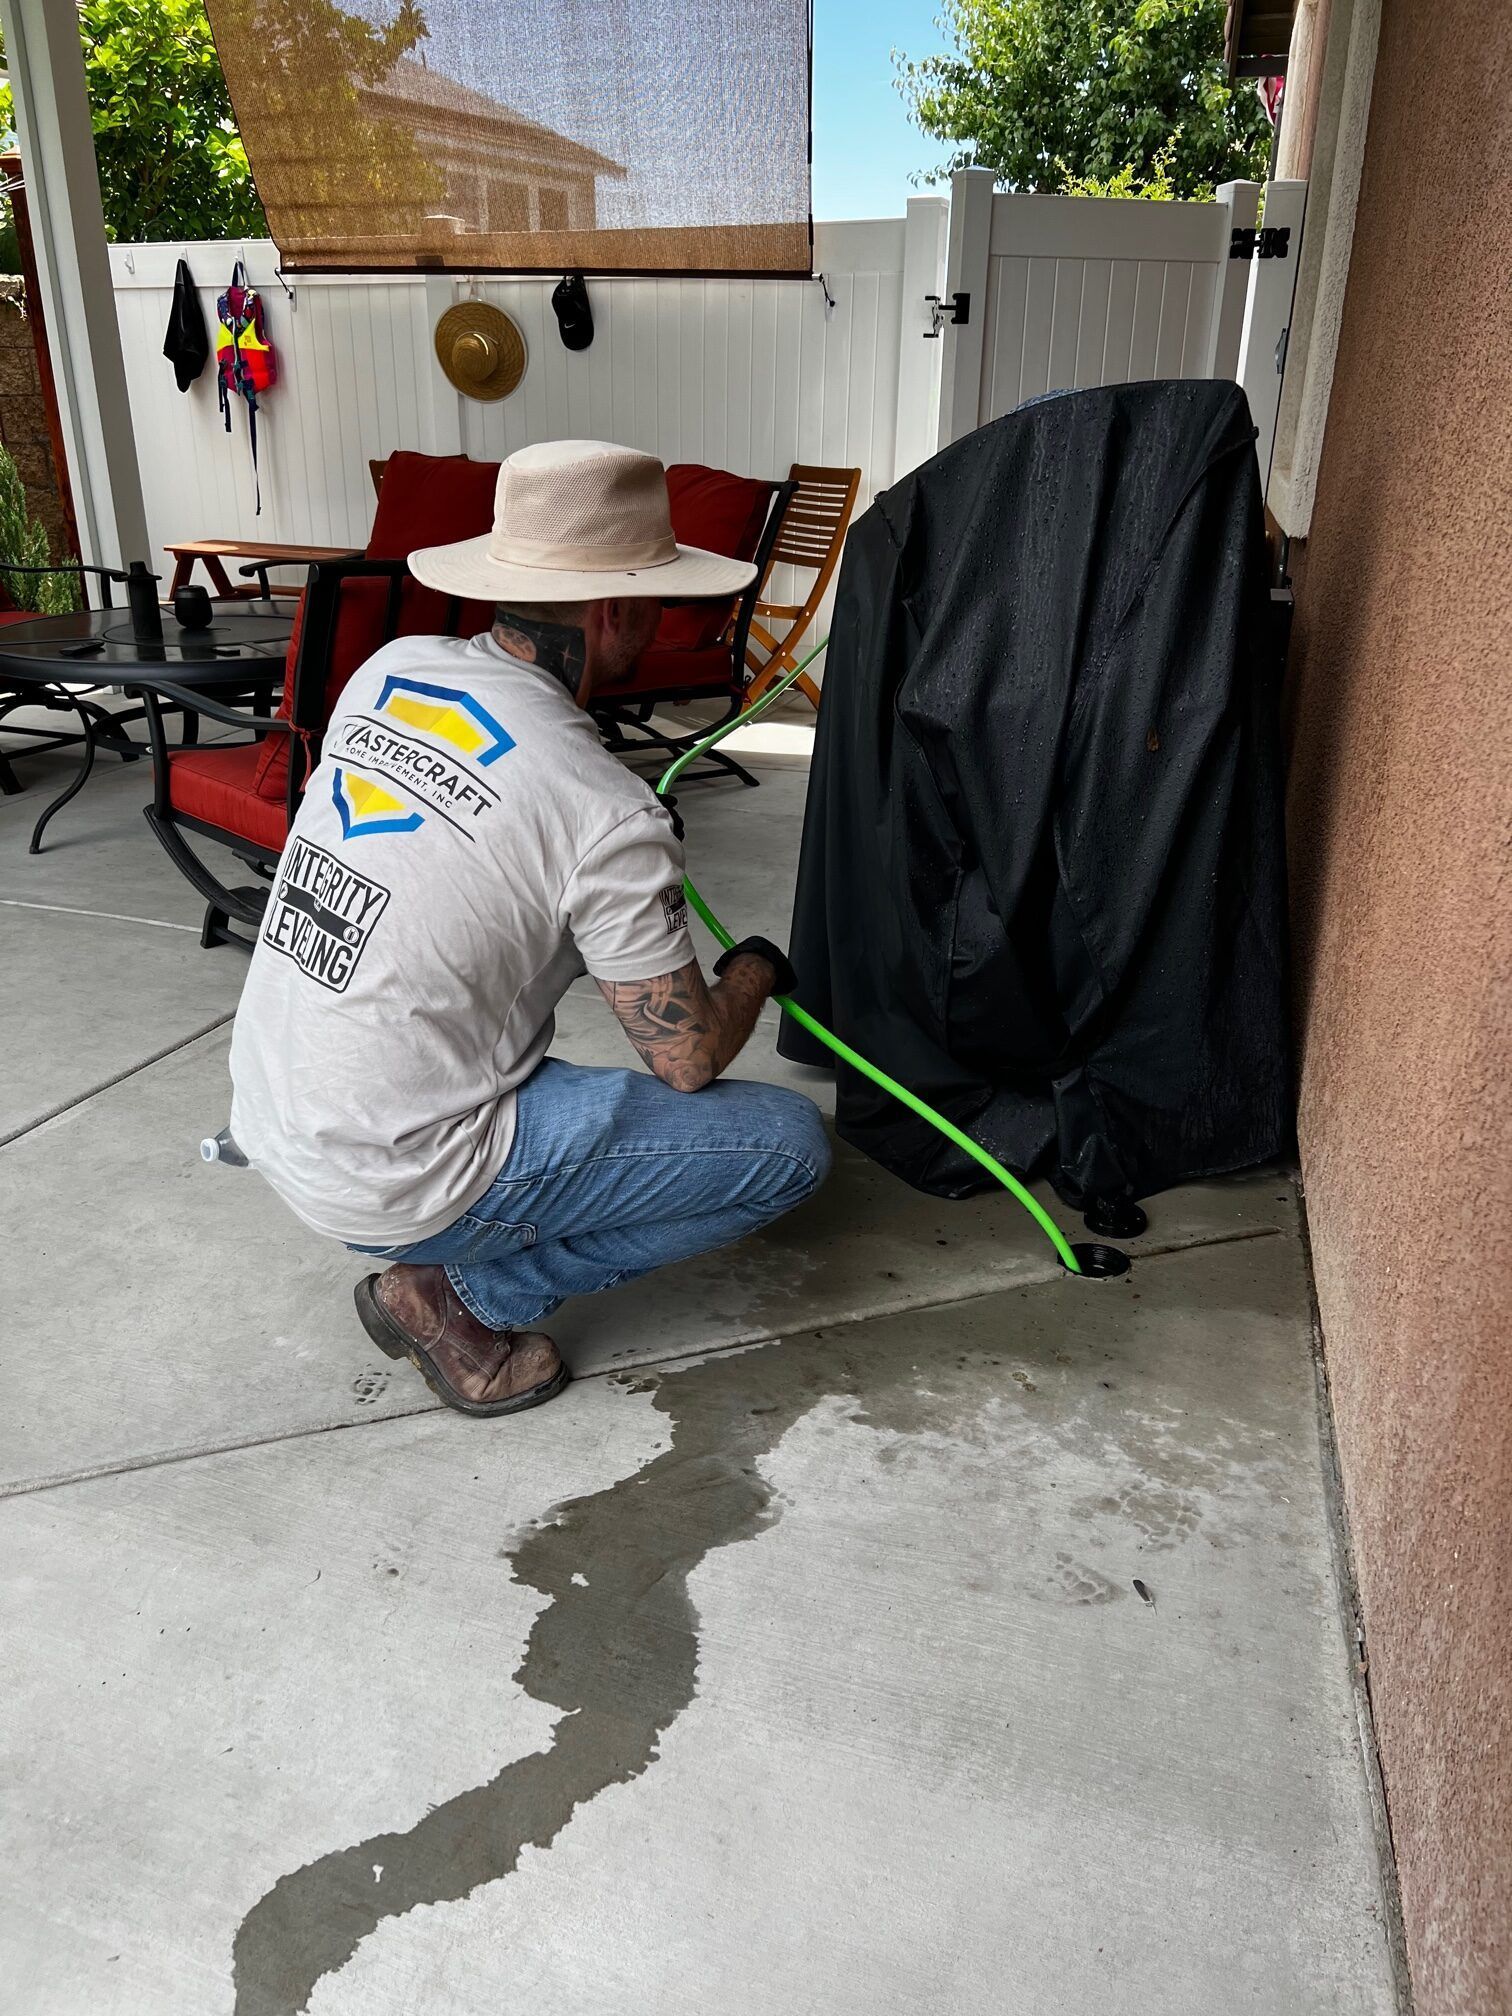 A man is kneeling down on a patio holding a green hose.